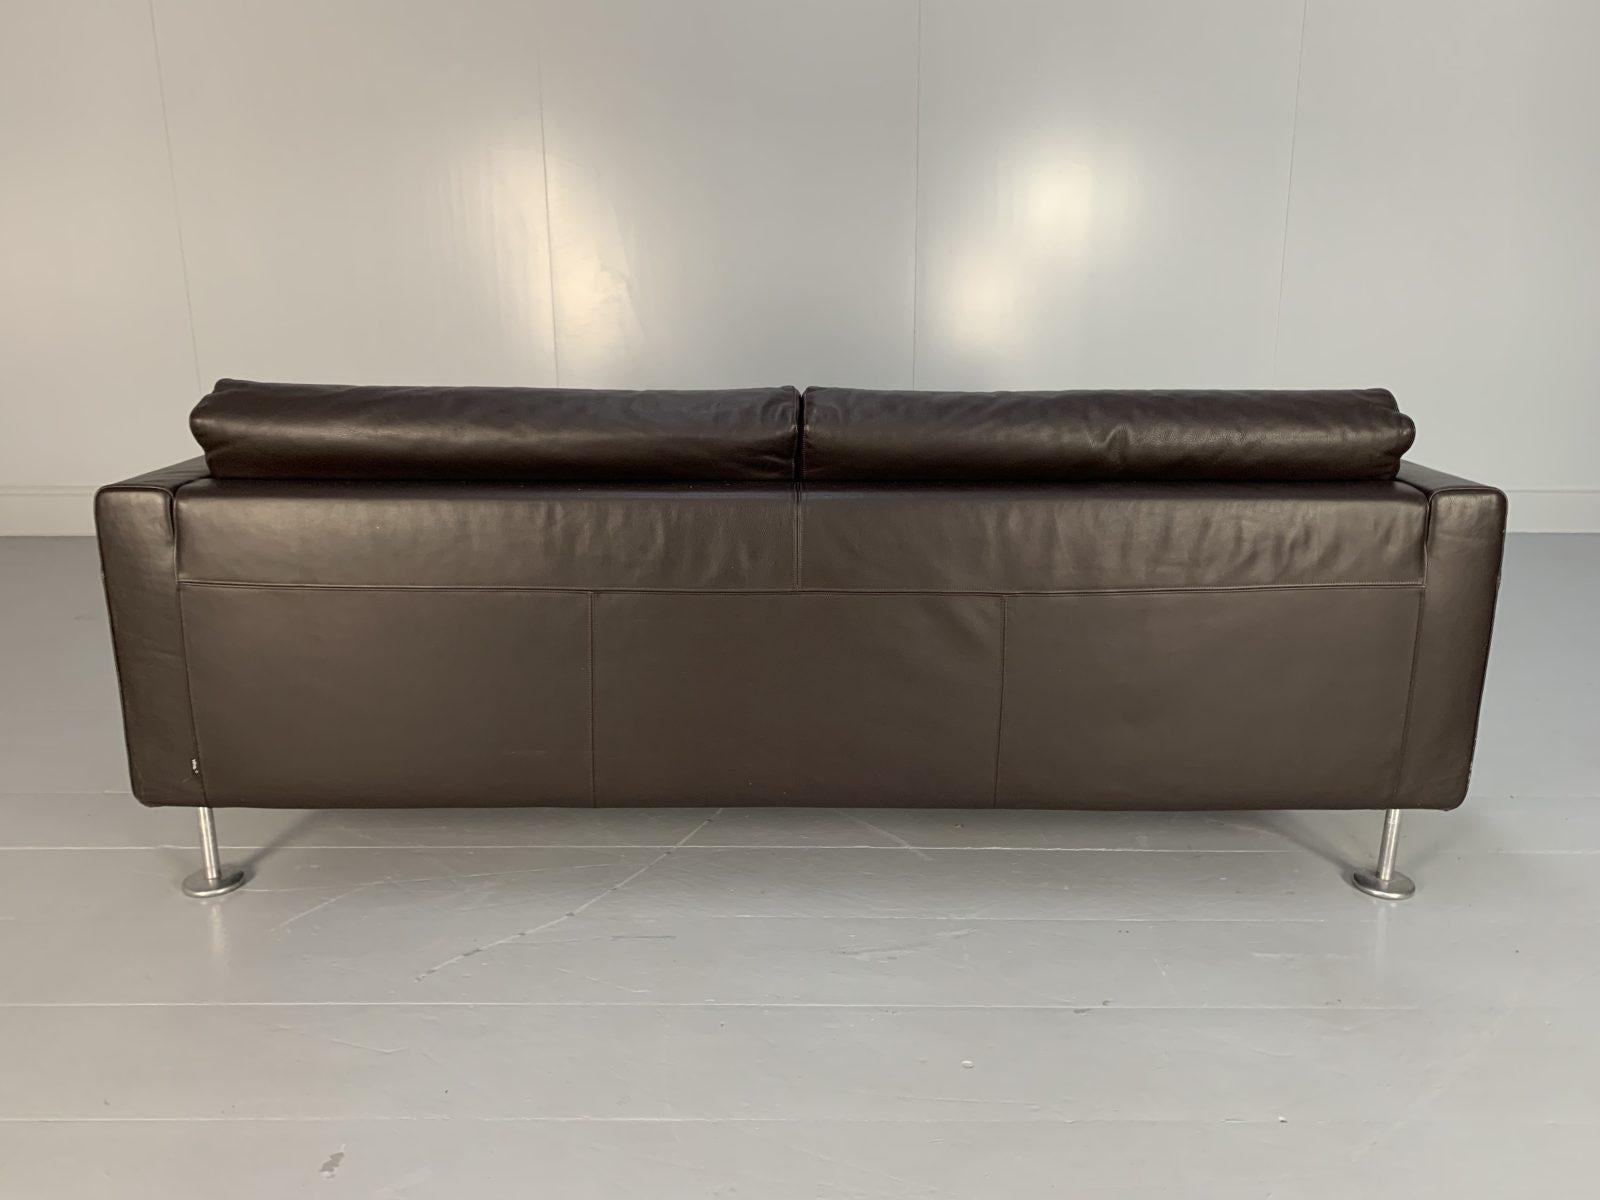 Vitra “Park” 2-Seat Sofa, in Dark Brown Leather In Good Condition For Sale In Barrowford, GB